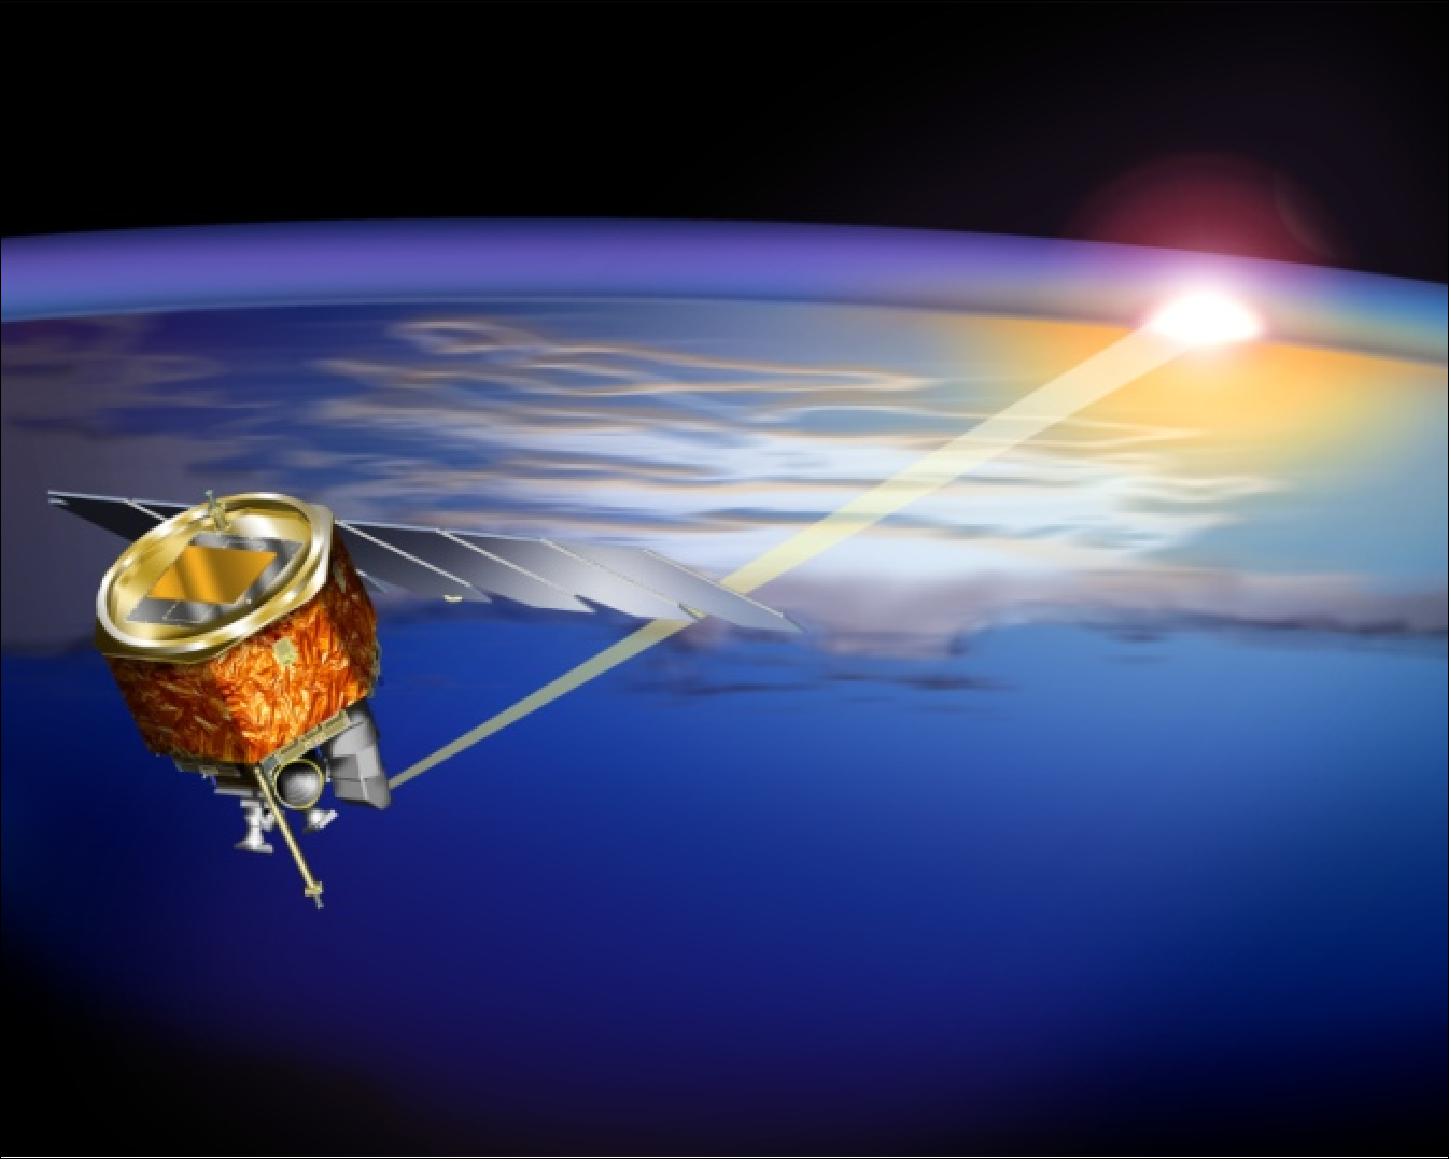 Figure 1: Artist's view of the AIM spacecraft in orbit to observe noctilucent clouds (image credit: Emily Hill Design)